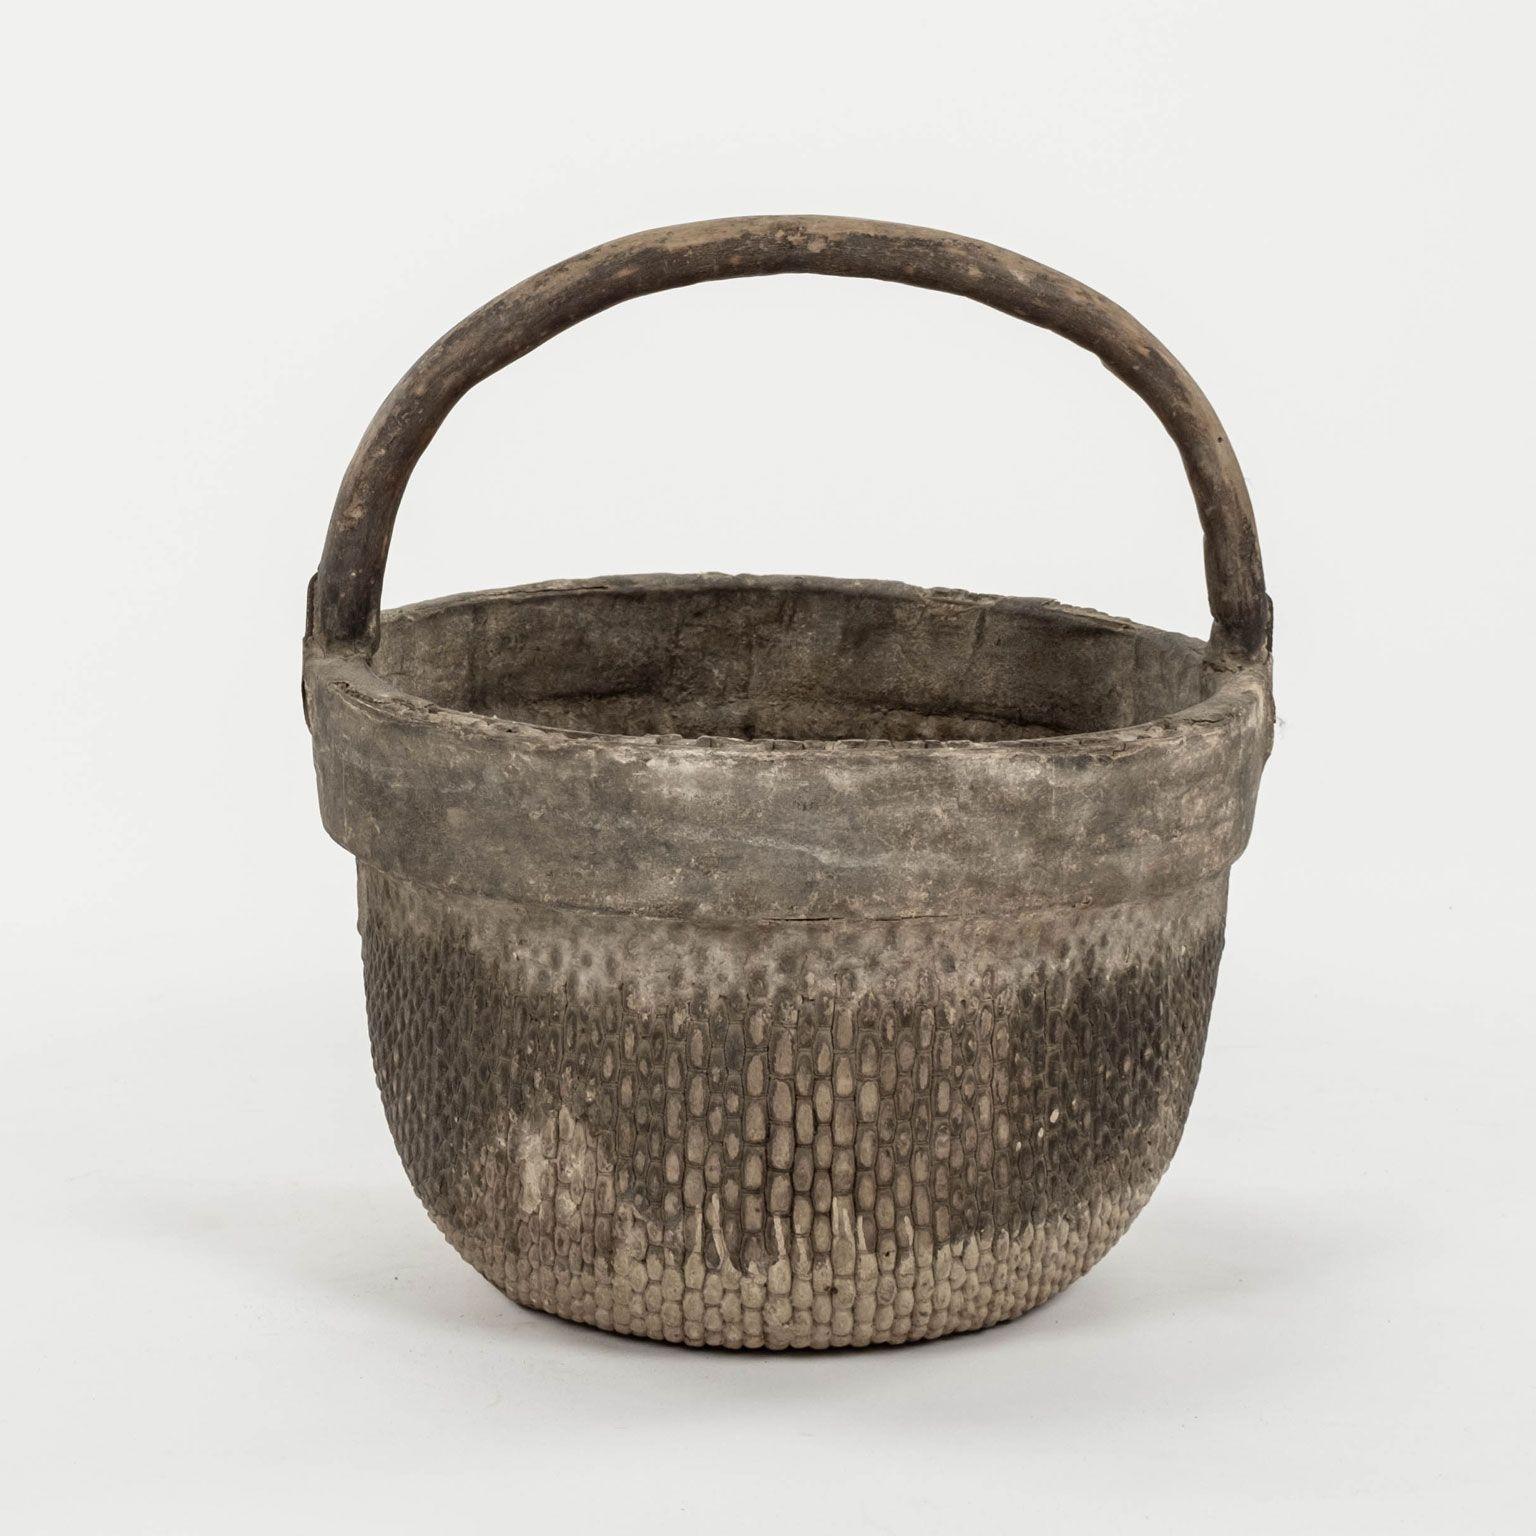 Mid-20th century woven Chinese rice basket with handle. Hand-woven willow with elm handle. Beautiful faded patina and texture from decades of wear. Three baskets available (see pictures). Baskets are sold individually and priced $1,400 each.

Note: